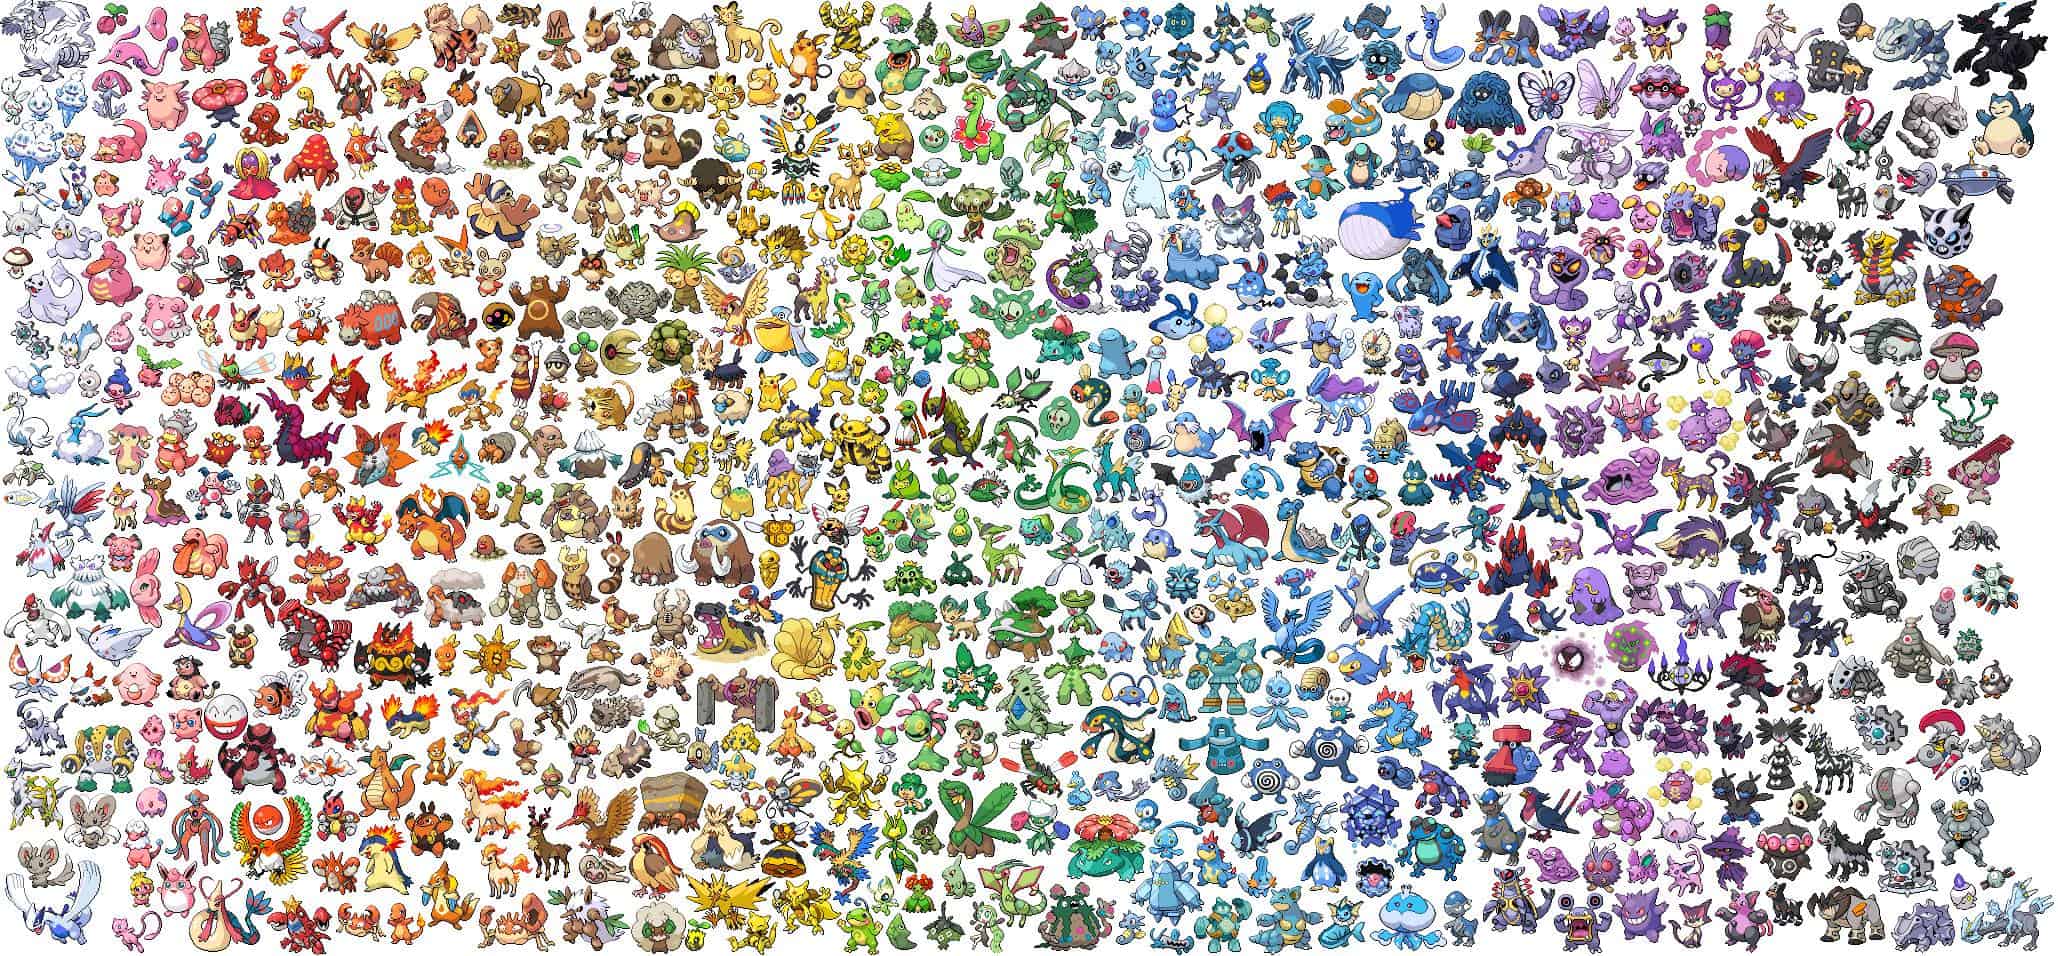 how many pokemon are there